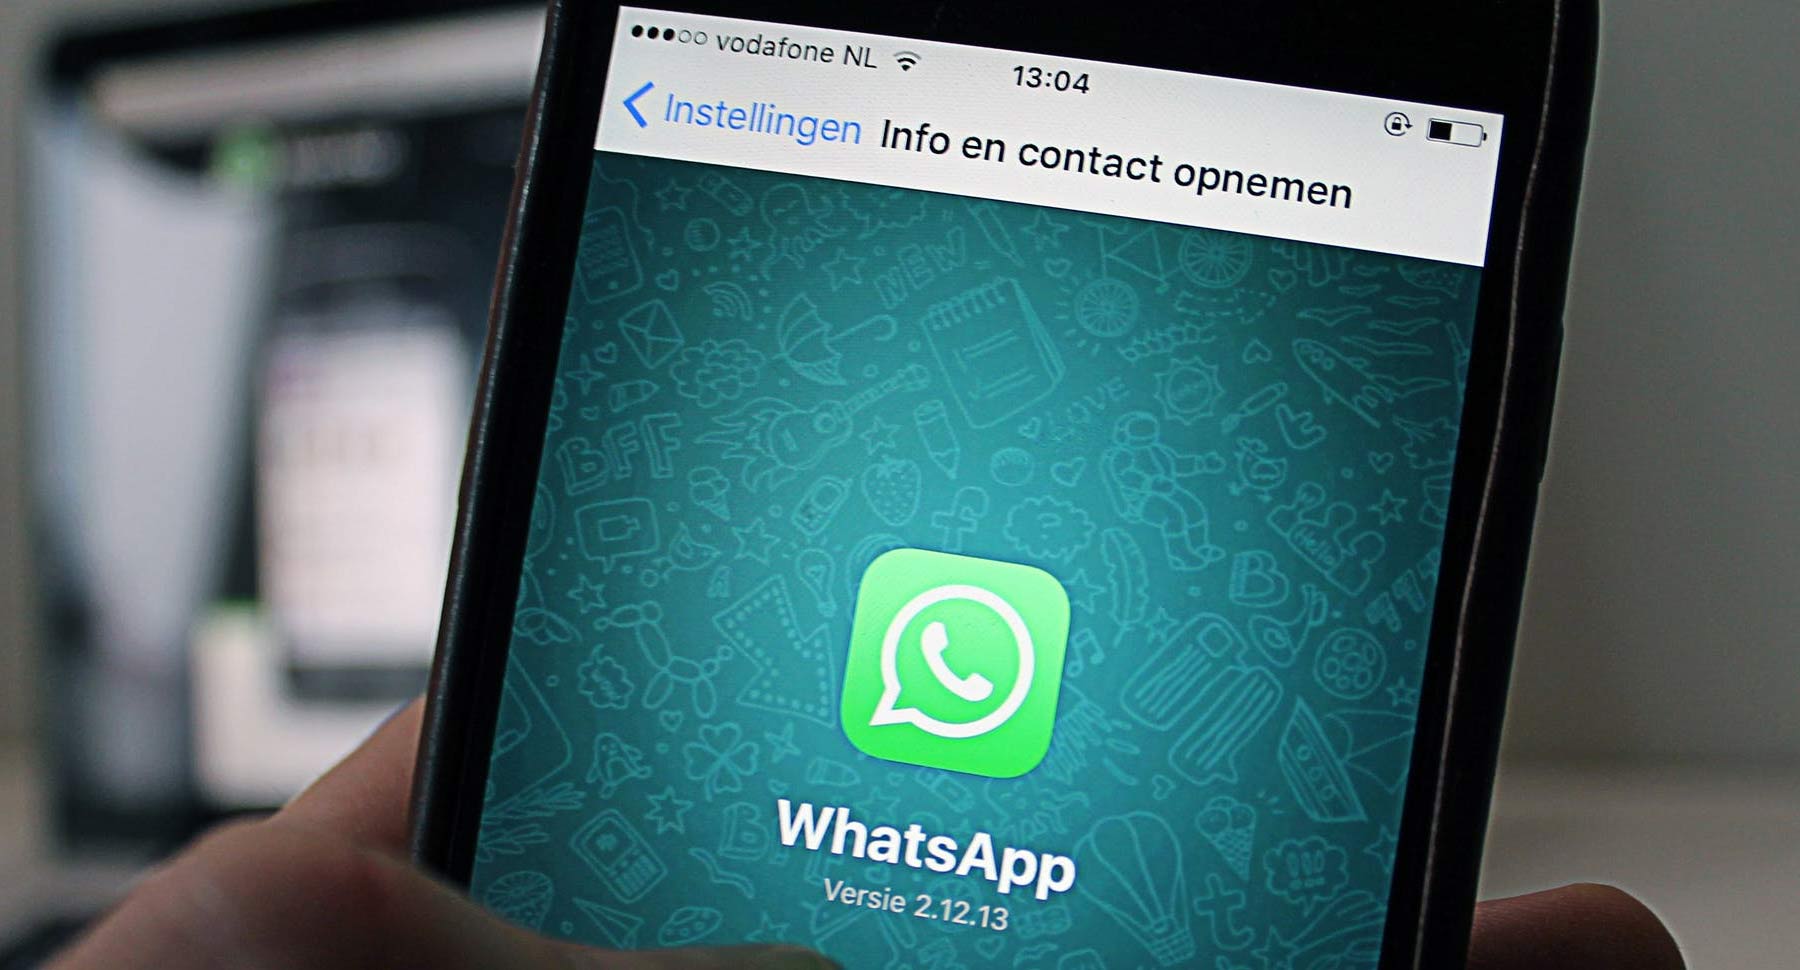 Recover deleted whatsapp messages